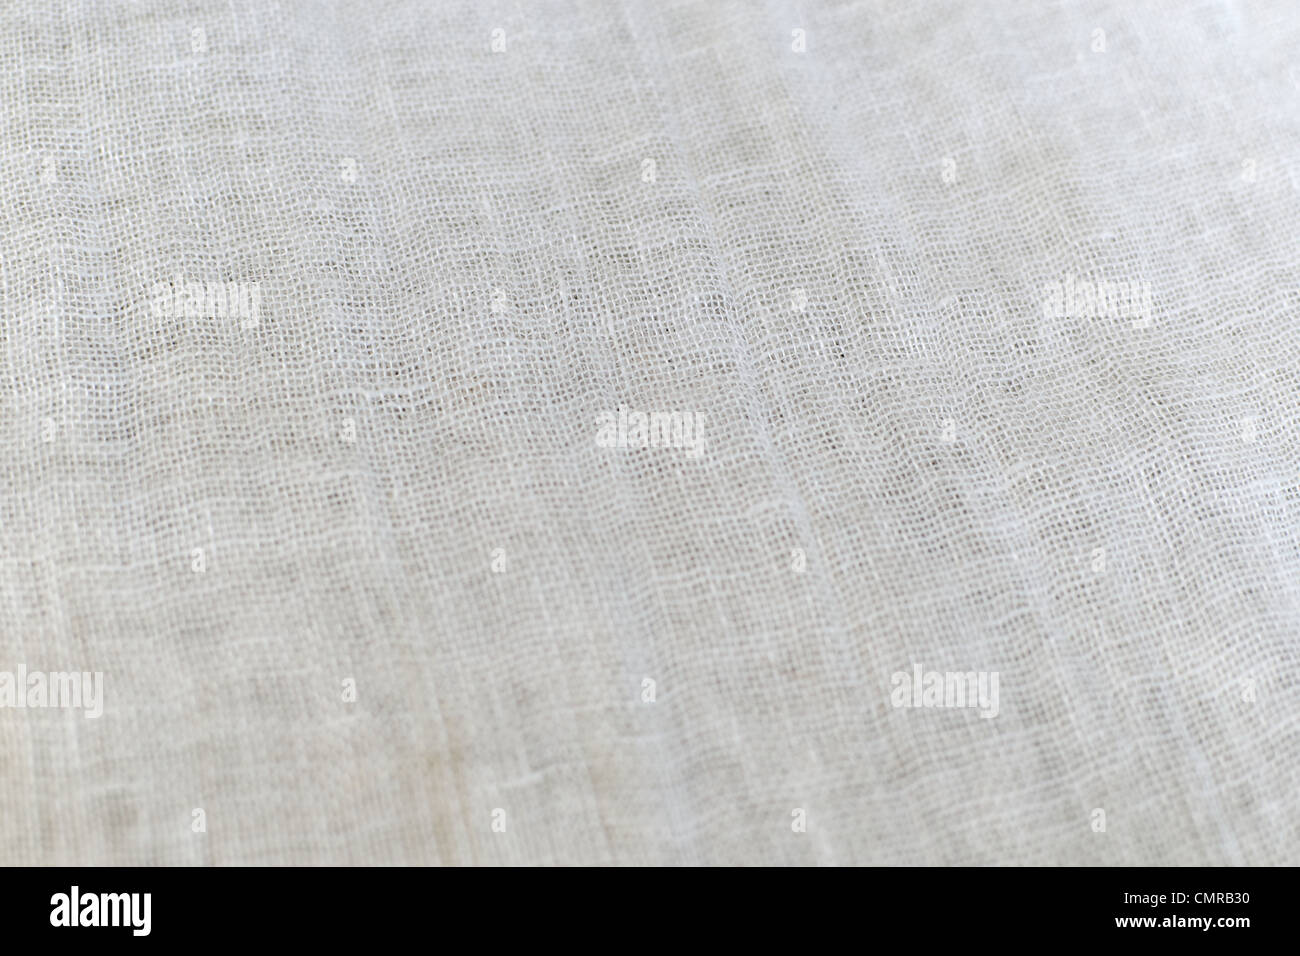 Woven fabric made from natural linen and silk. Natural material. Select focus. Stock Photo